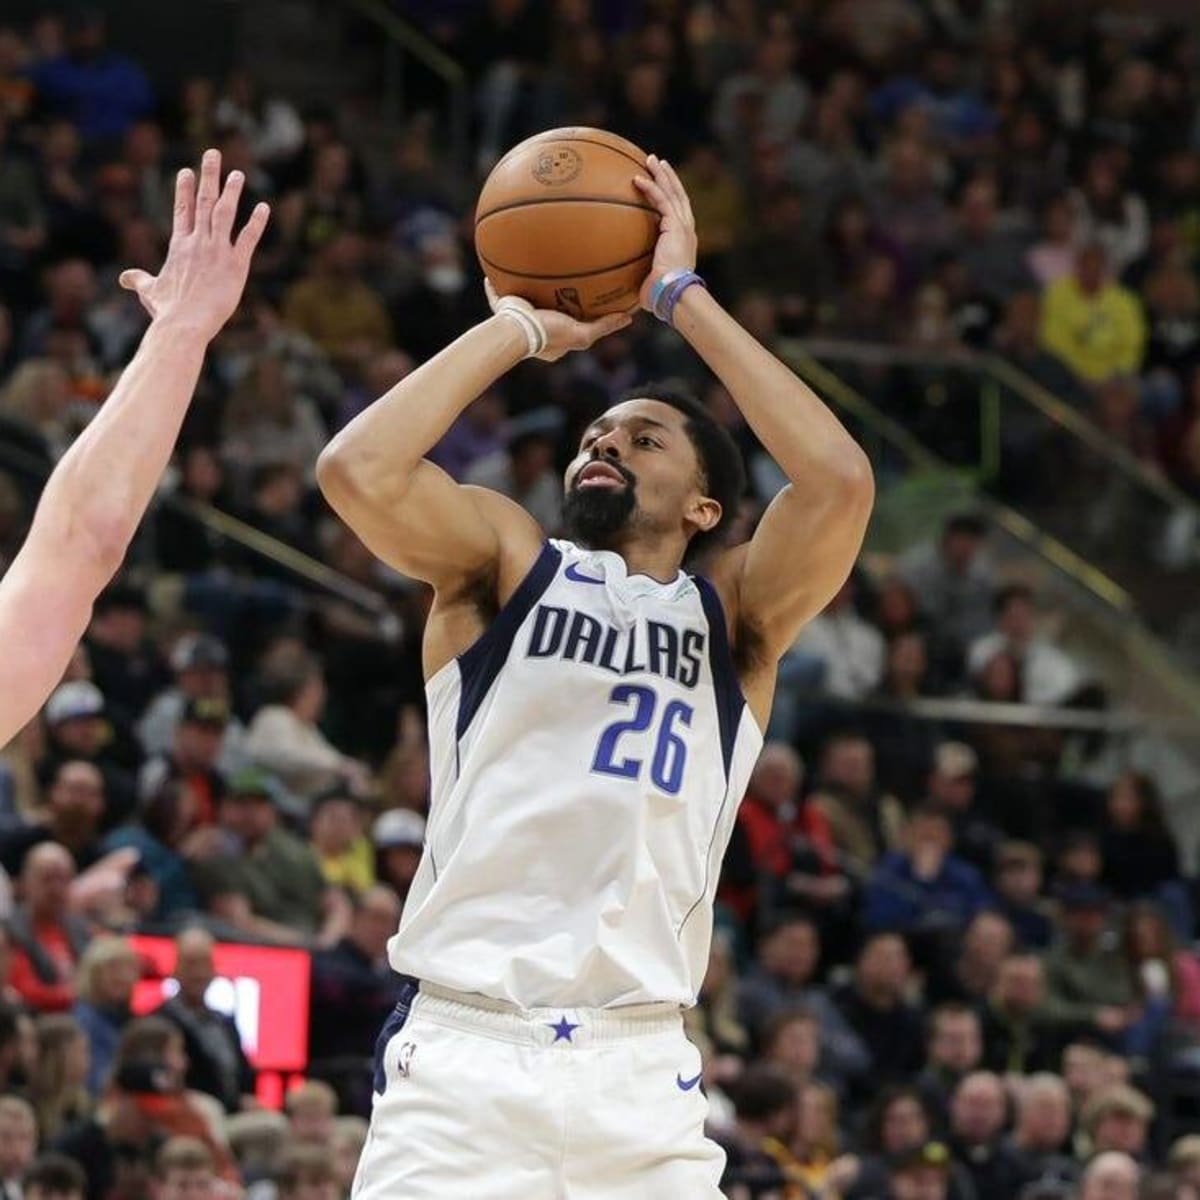 RUMOR: Christian Wood's 2022 trade to Mavs wasn't approved by Jason Kidd